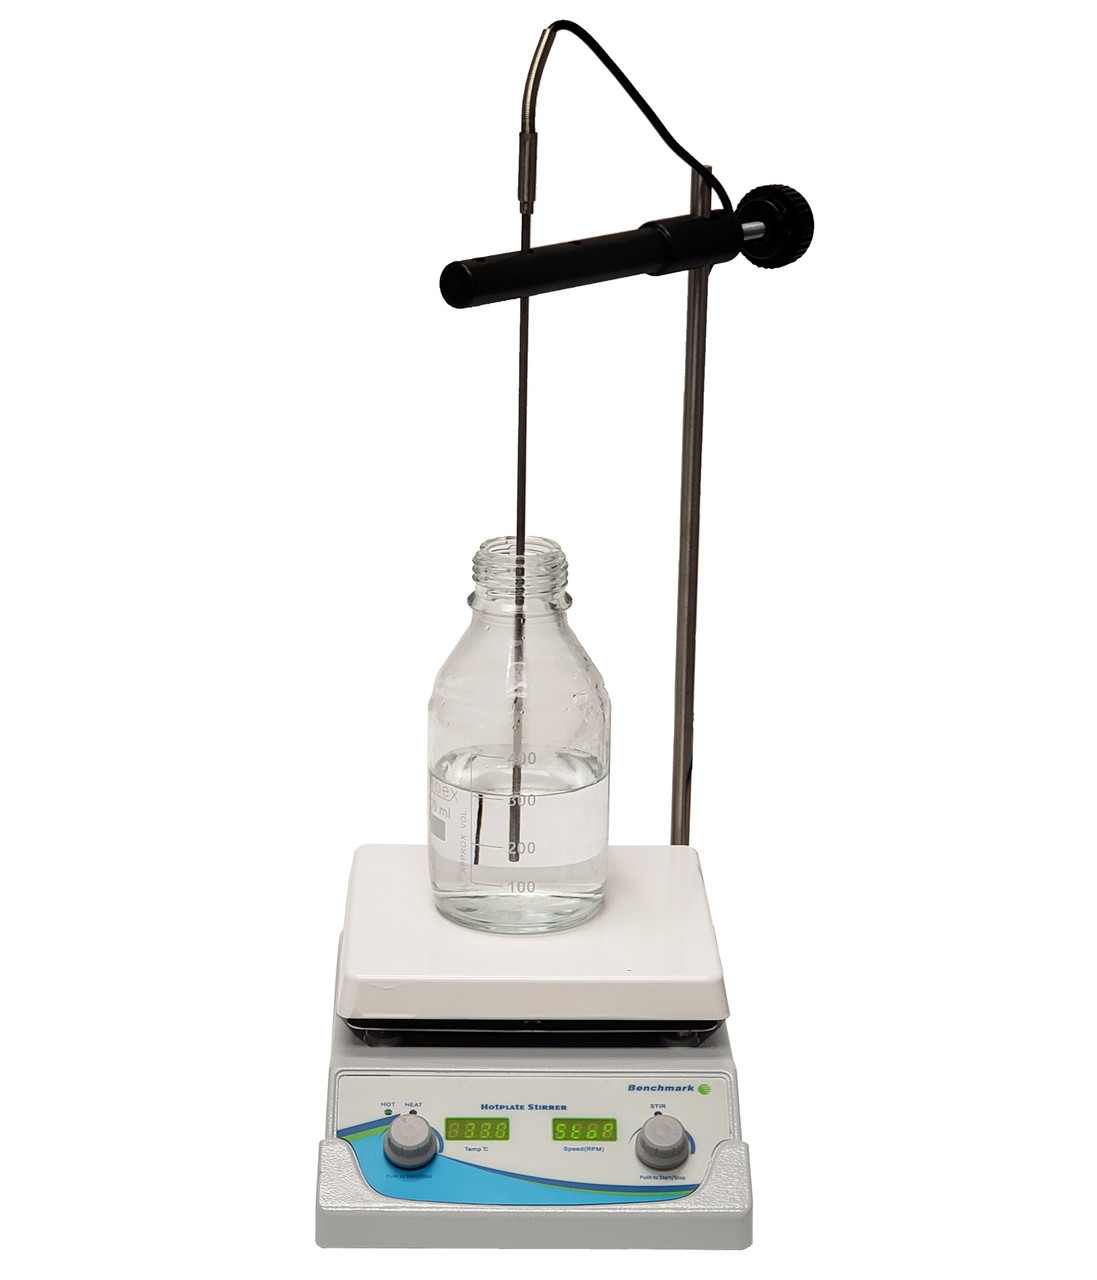 https://cdn11.bigcommerce.com/s-w9bdixgj/images/stencil/1280x1280/products/2965/6630/Clamp_Rod_and_Temperature_Probe_for_Benchmark_Scientific_H3770_Hotplates_and_Hotplate_Stirrers_Give_you_Precise_Temperature_Control_H3770_-CS-TF-_Lab_Equipment_-_Stellar_Scientific__93811.1576534445.jpg?c=2